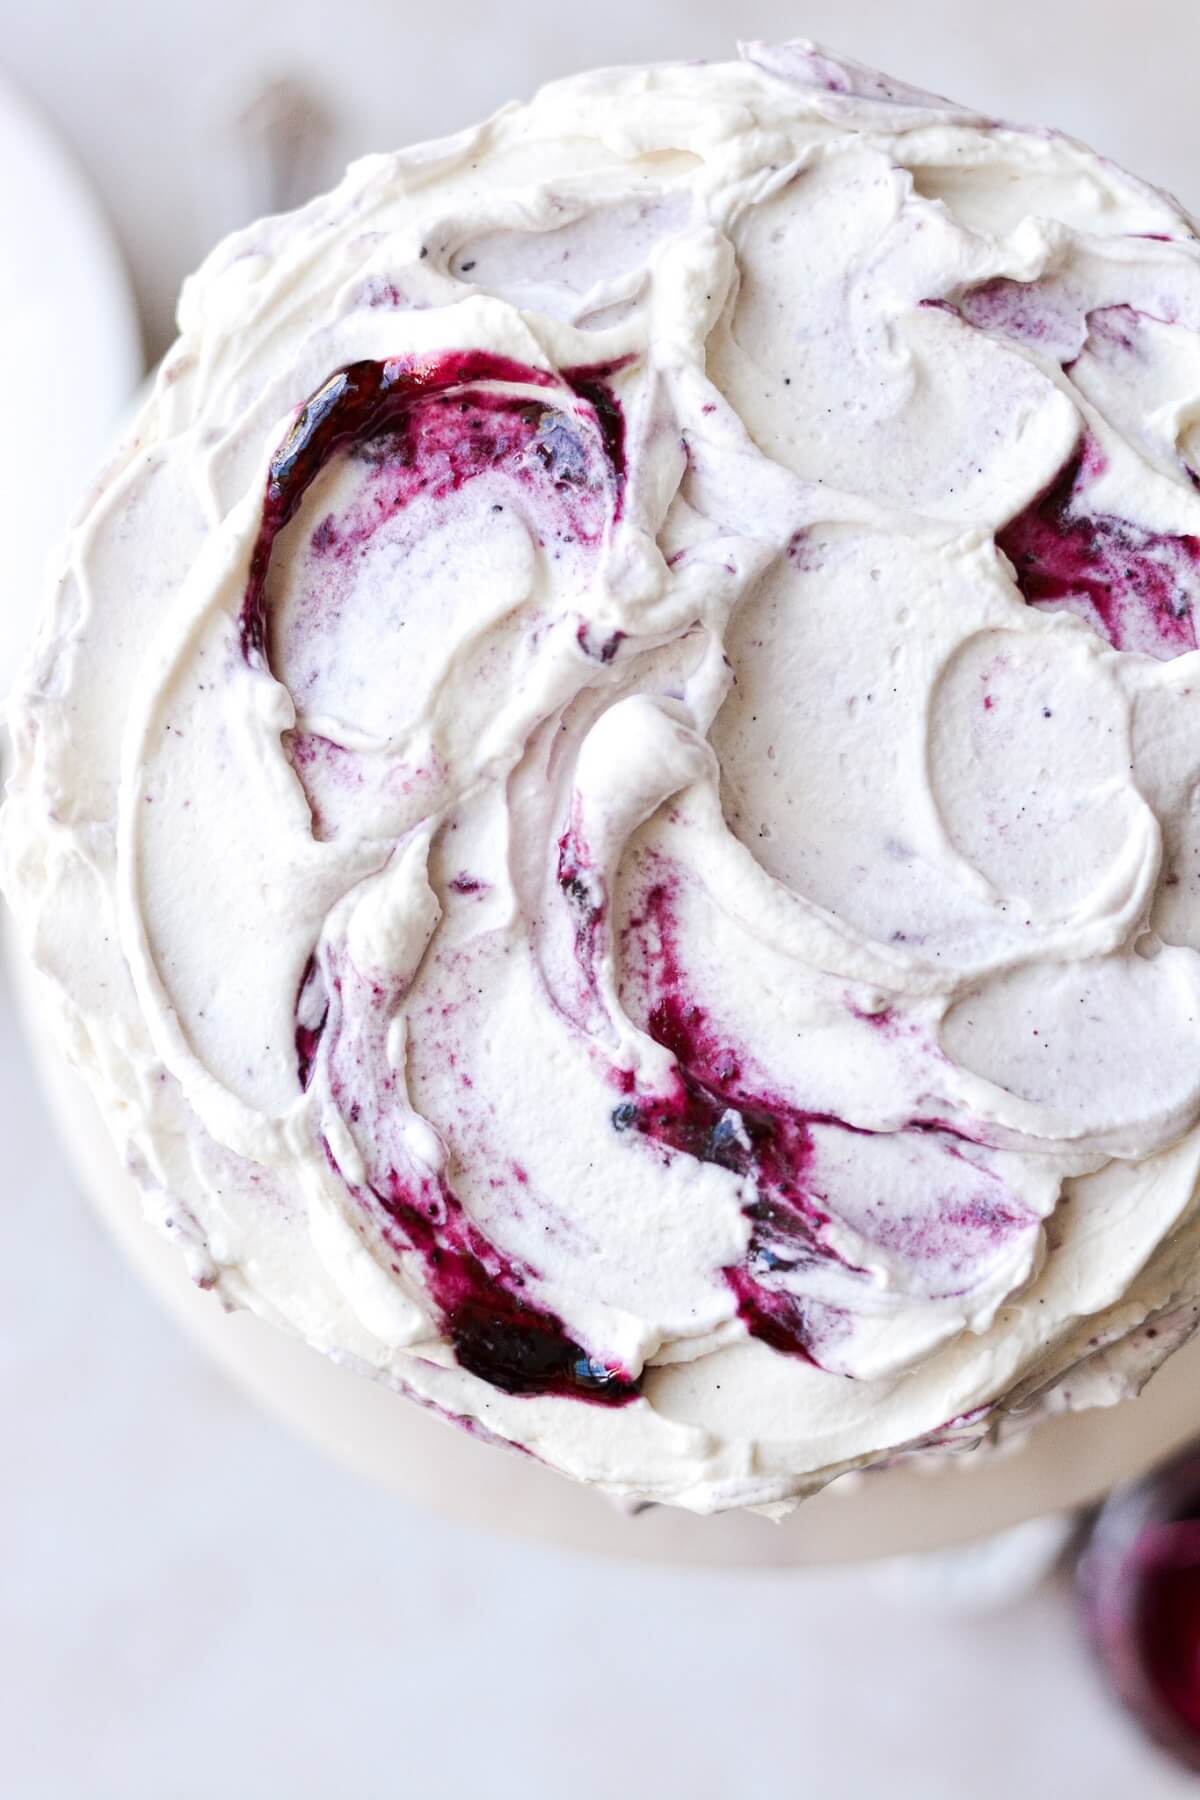 Blueberry jam swirled into whipped cream frosting.